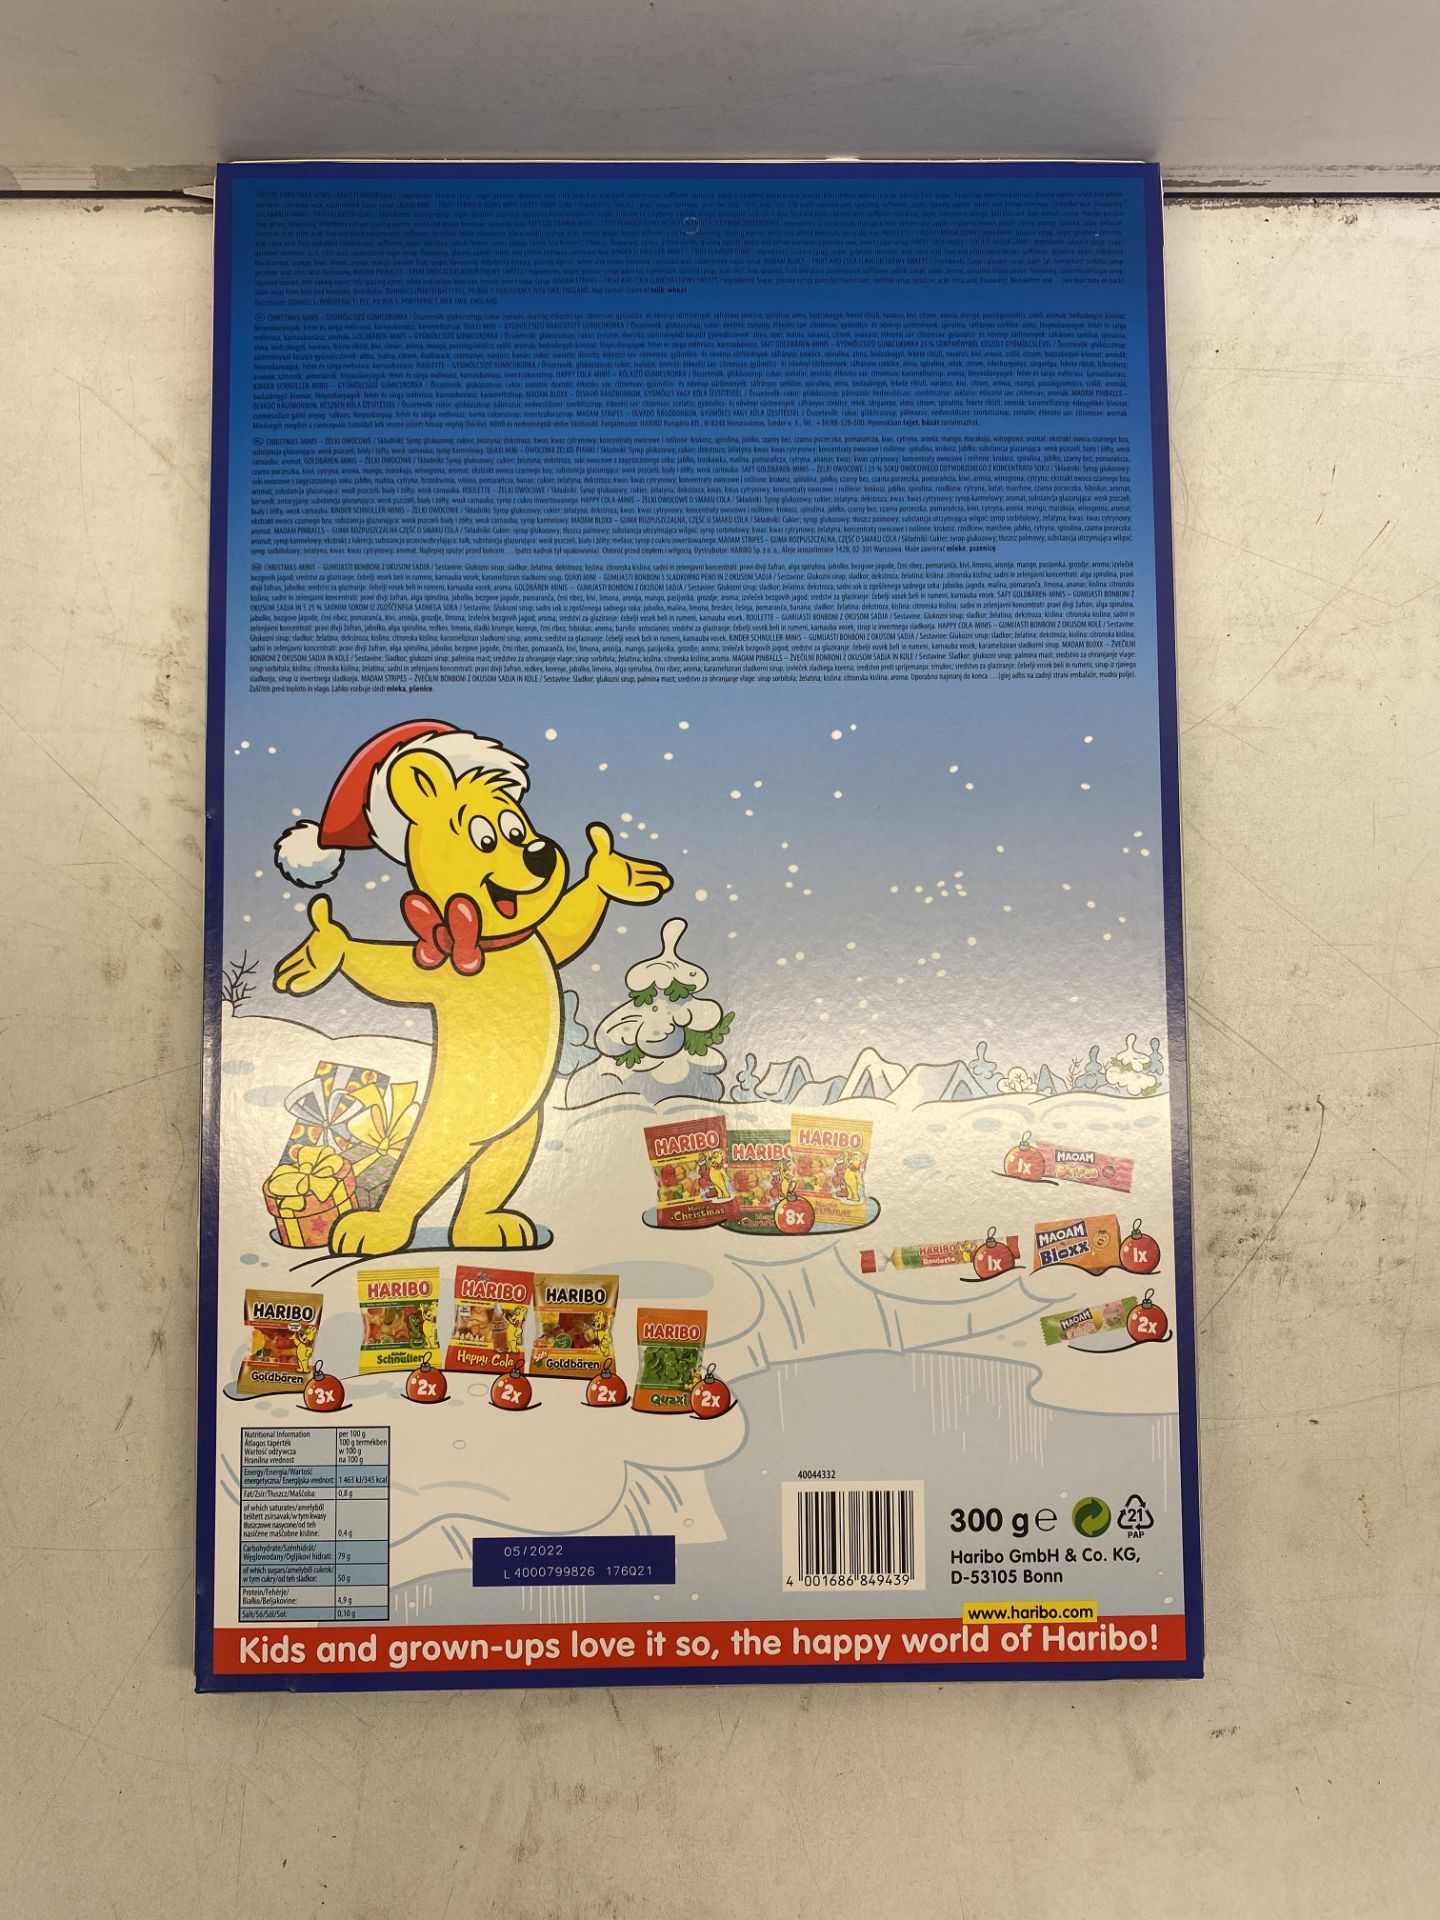 14 x Out Of Date 05/2022 Haribo Christmas Advent Calendars - Image 4 of 6